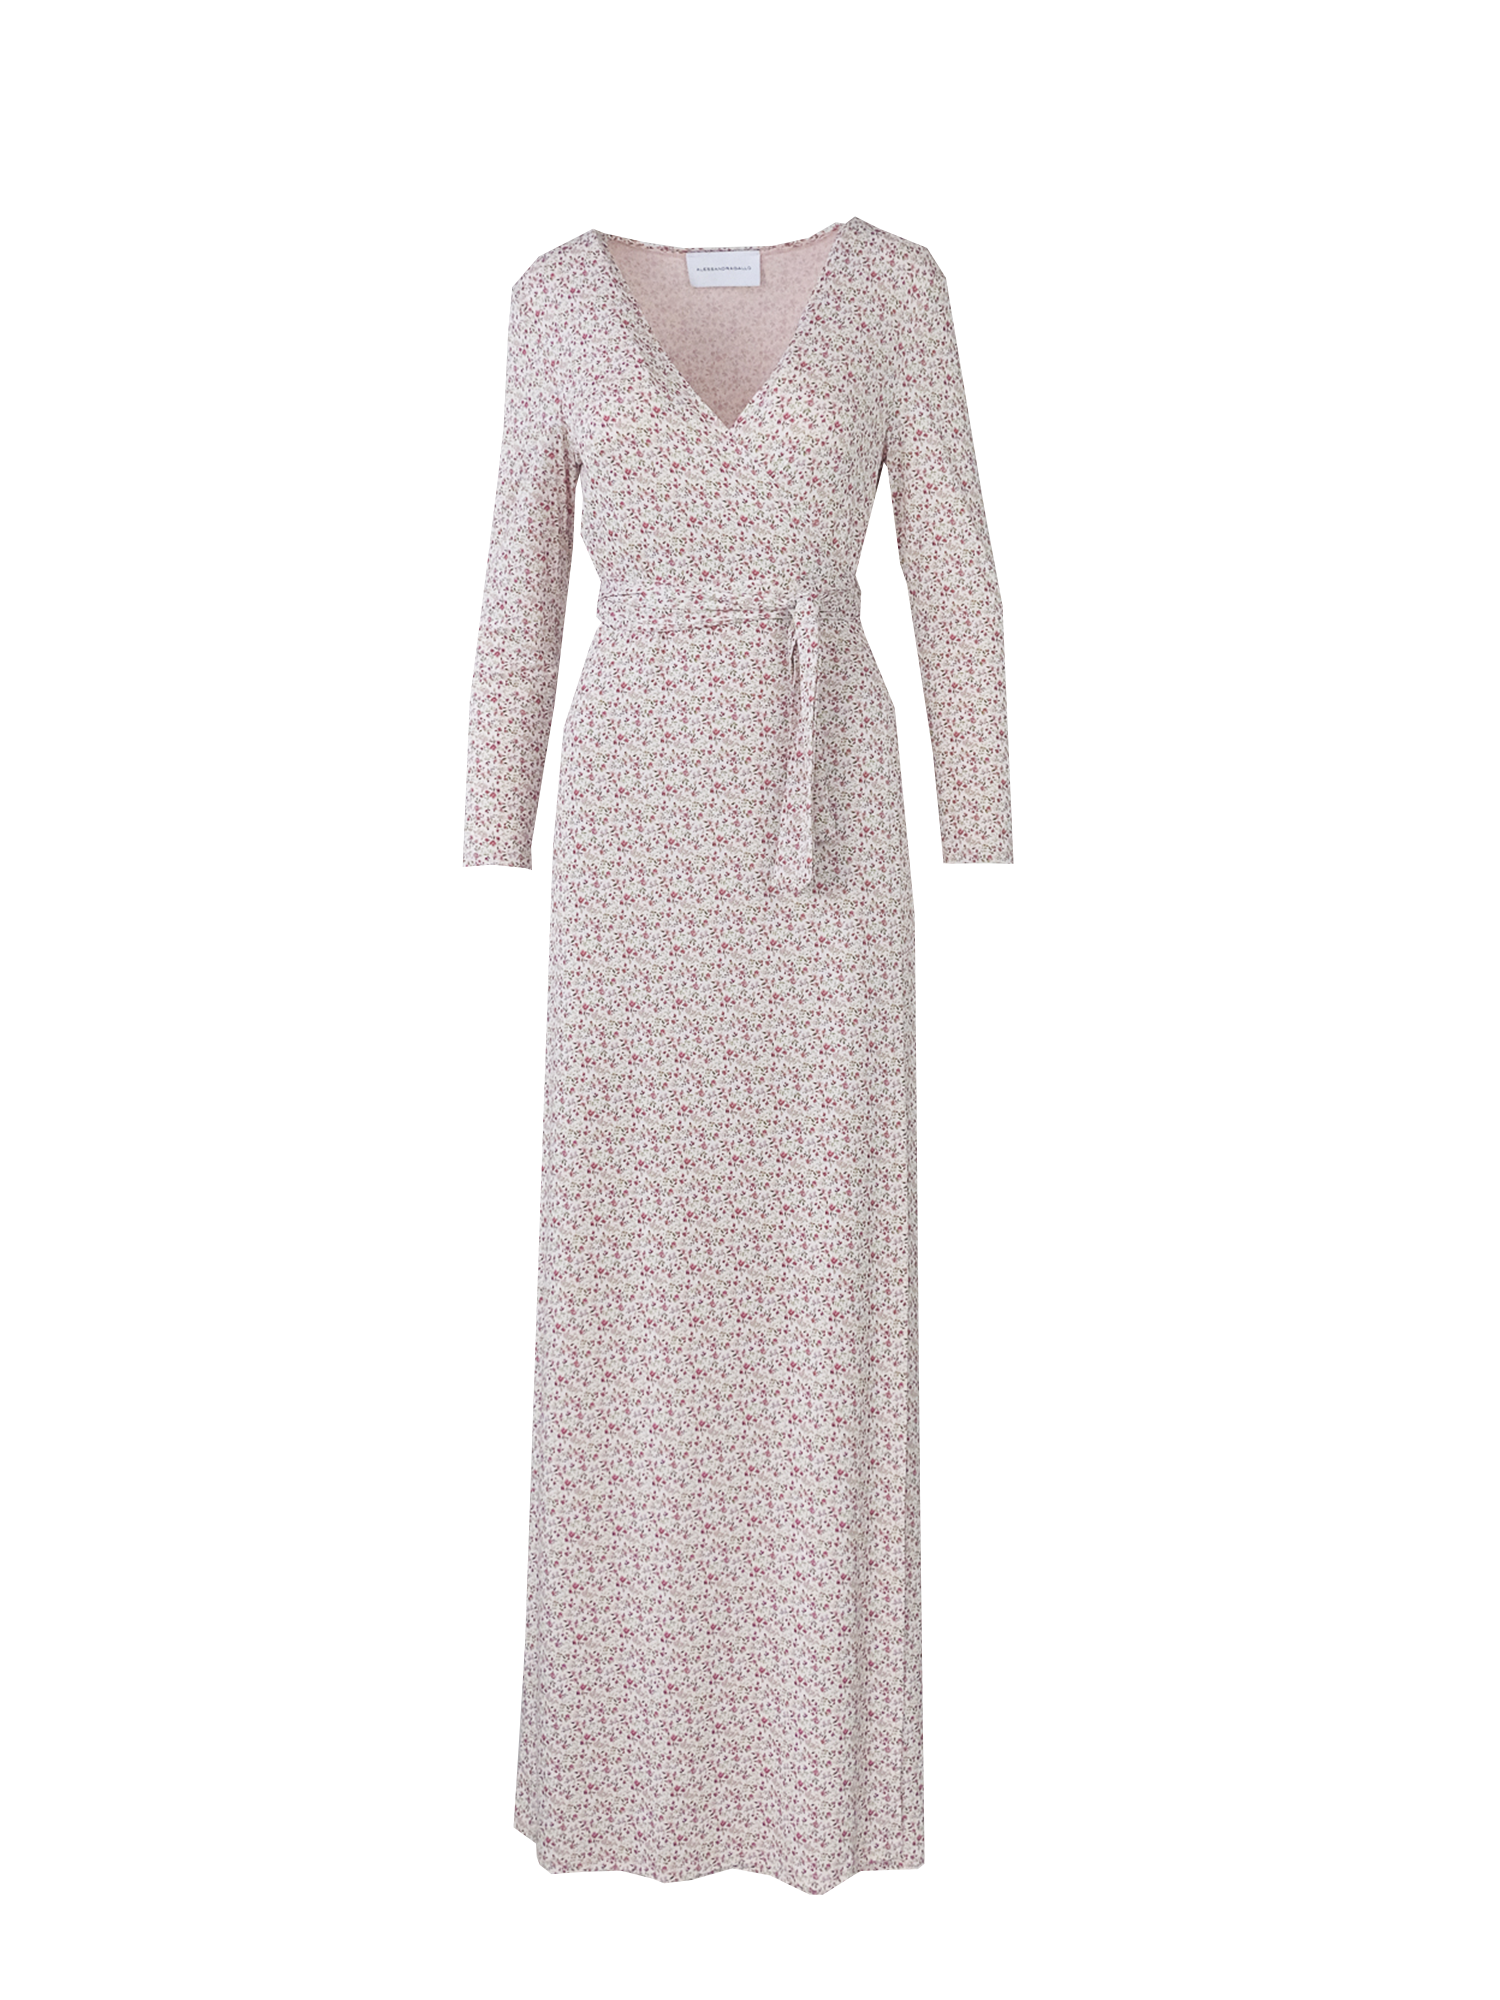 LETIZIA - long wraparound dress with sleeves in print roses lycra